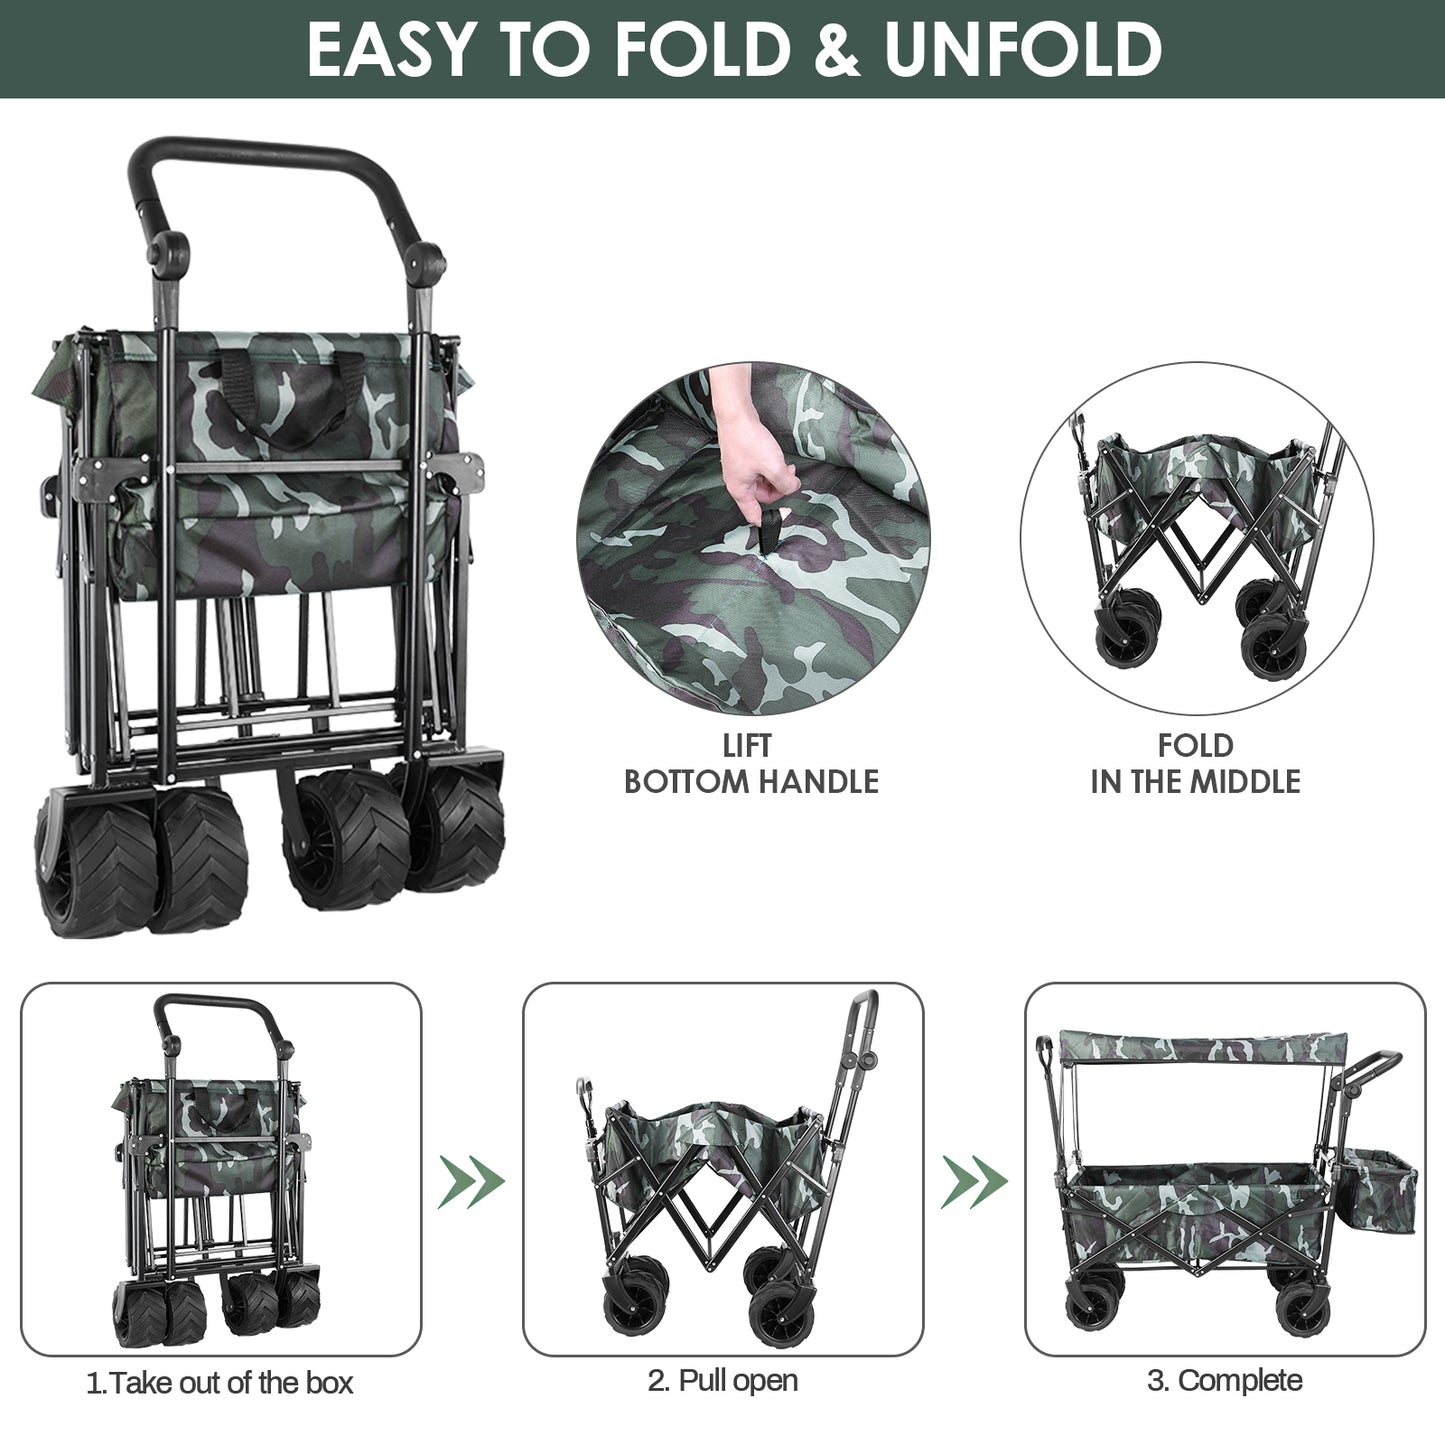 Arlopu Collapsible Wagon Folding Garden Cart w/ Removable Canopy and Pockets